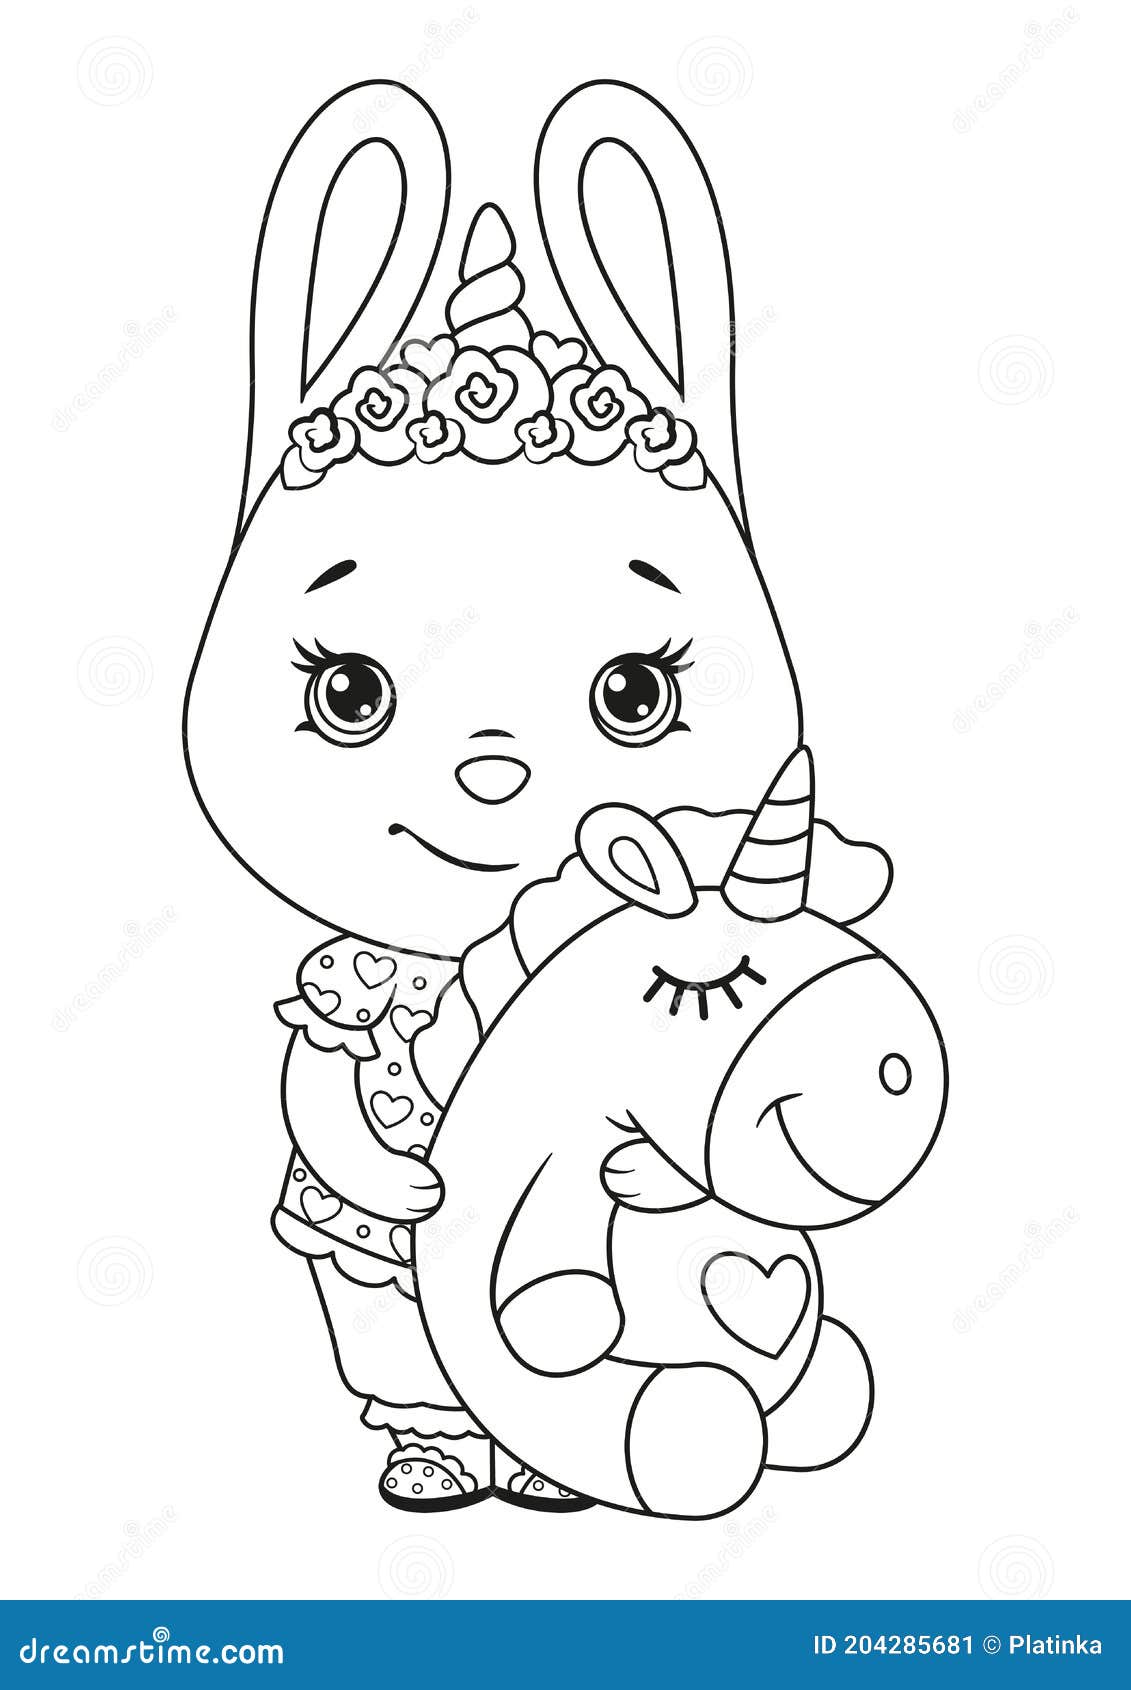 Bunny in Pajamas with Toy Unicorn Coloring Page. Black and White ...